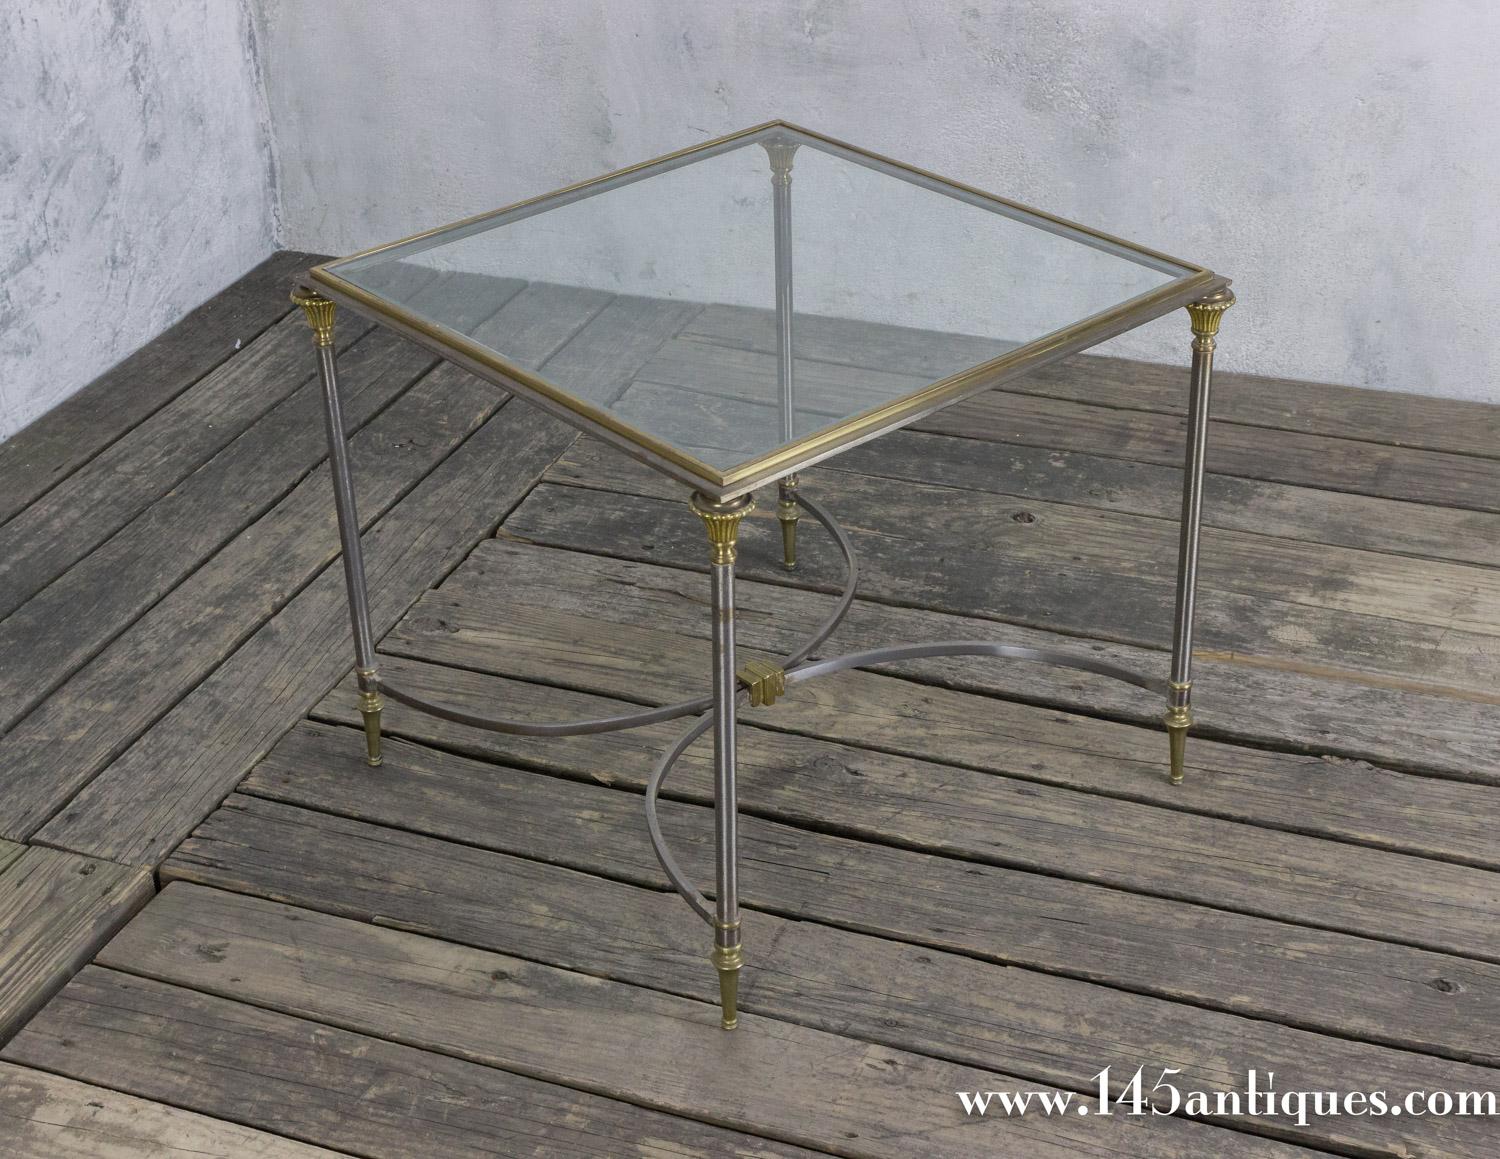 This square polished steel coffee table features brass highlights, a center stretcher, and an inset glass top. Reminiscent of the style of Maison Jansen, this table is believed to be Italian from the 1950s. In good vintage condition, this coffee